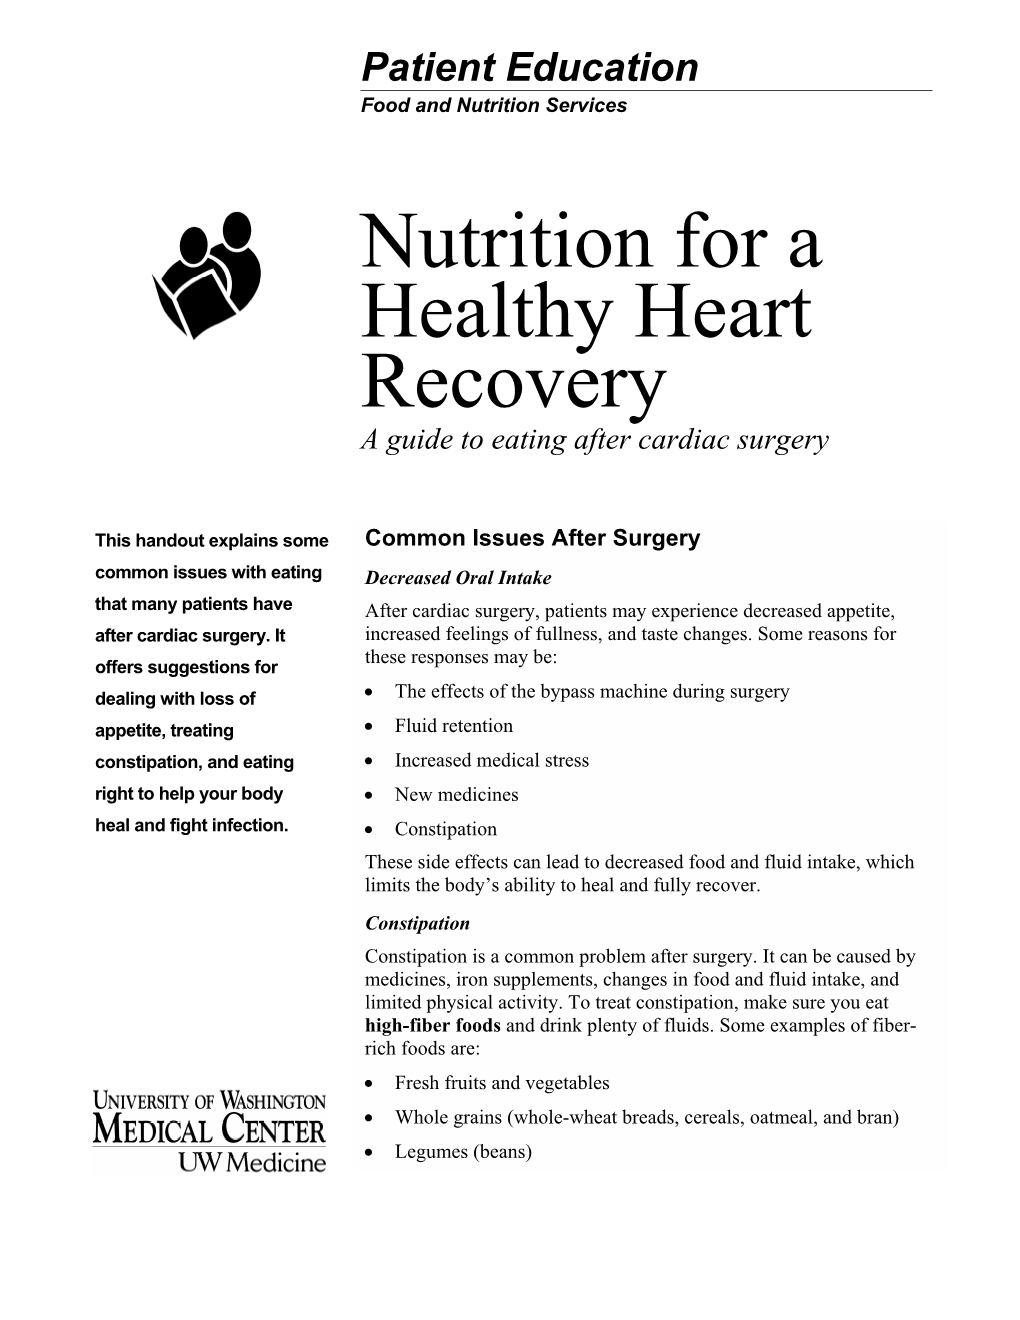 Nutrition for a Healthy Heart Recovery